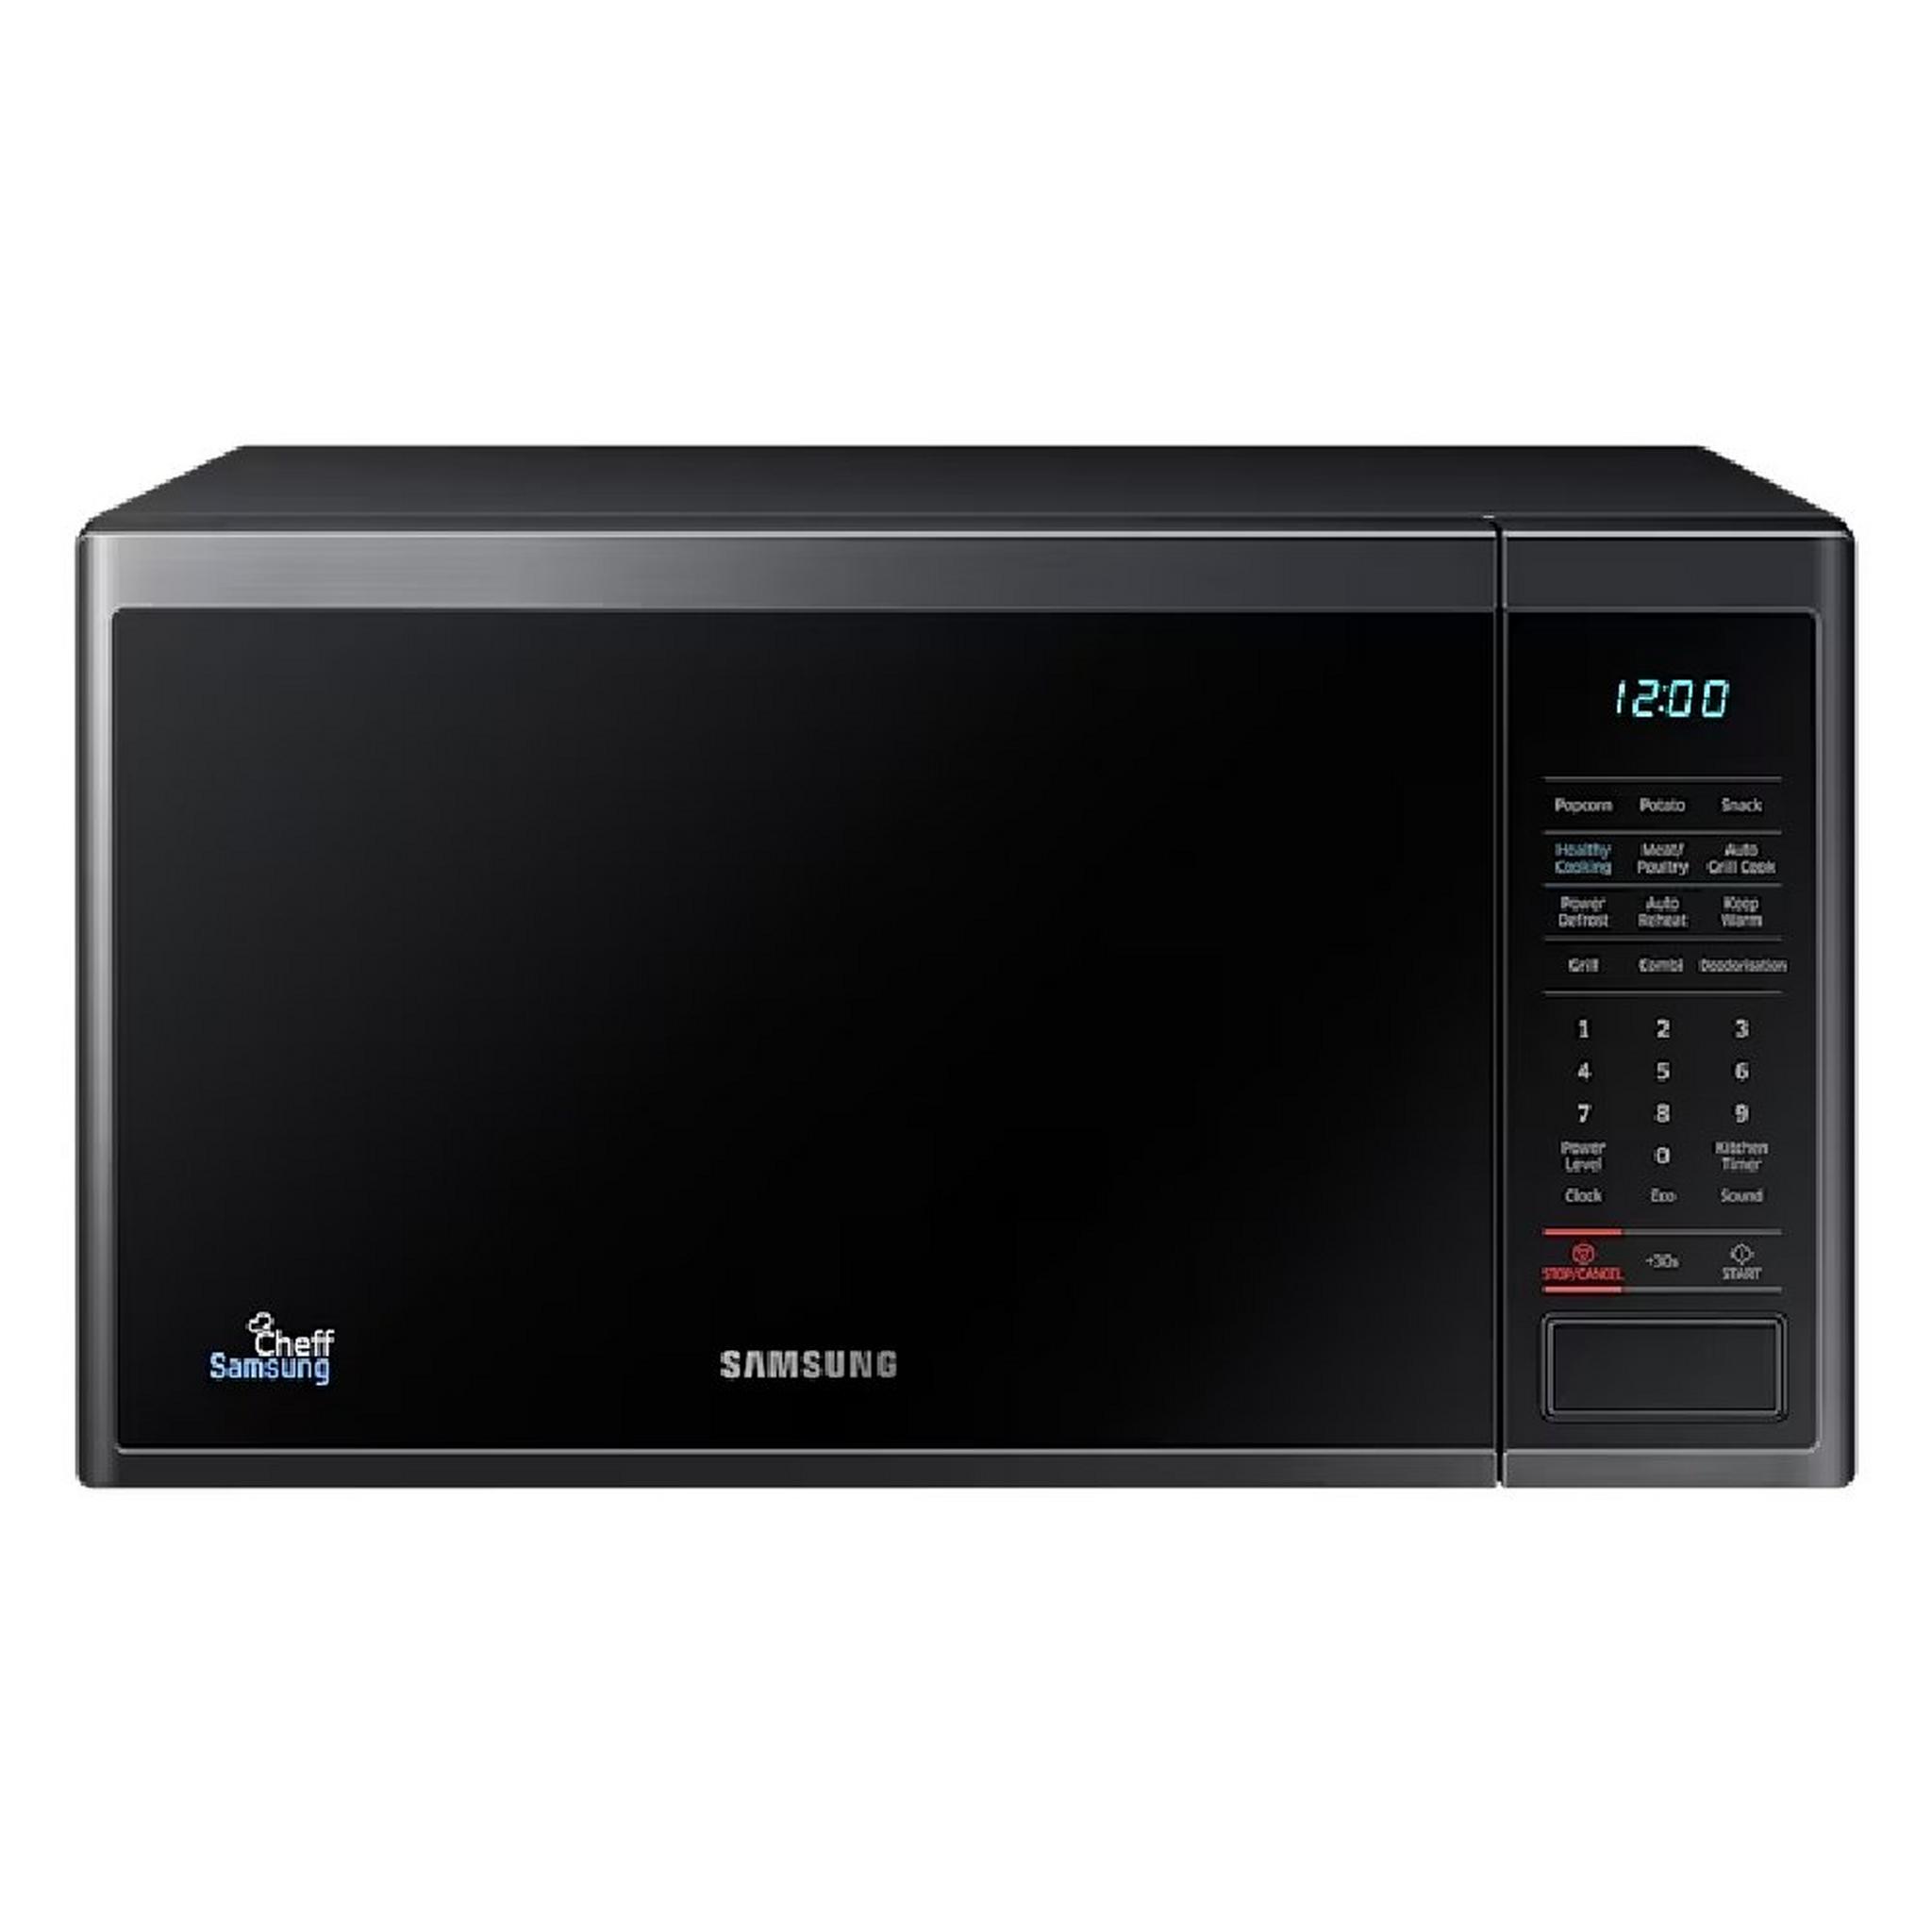 Samsung Microwave Oven Grill 900W, 32L, MG32J5133AG – Black